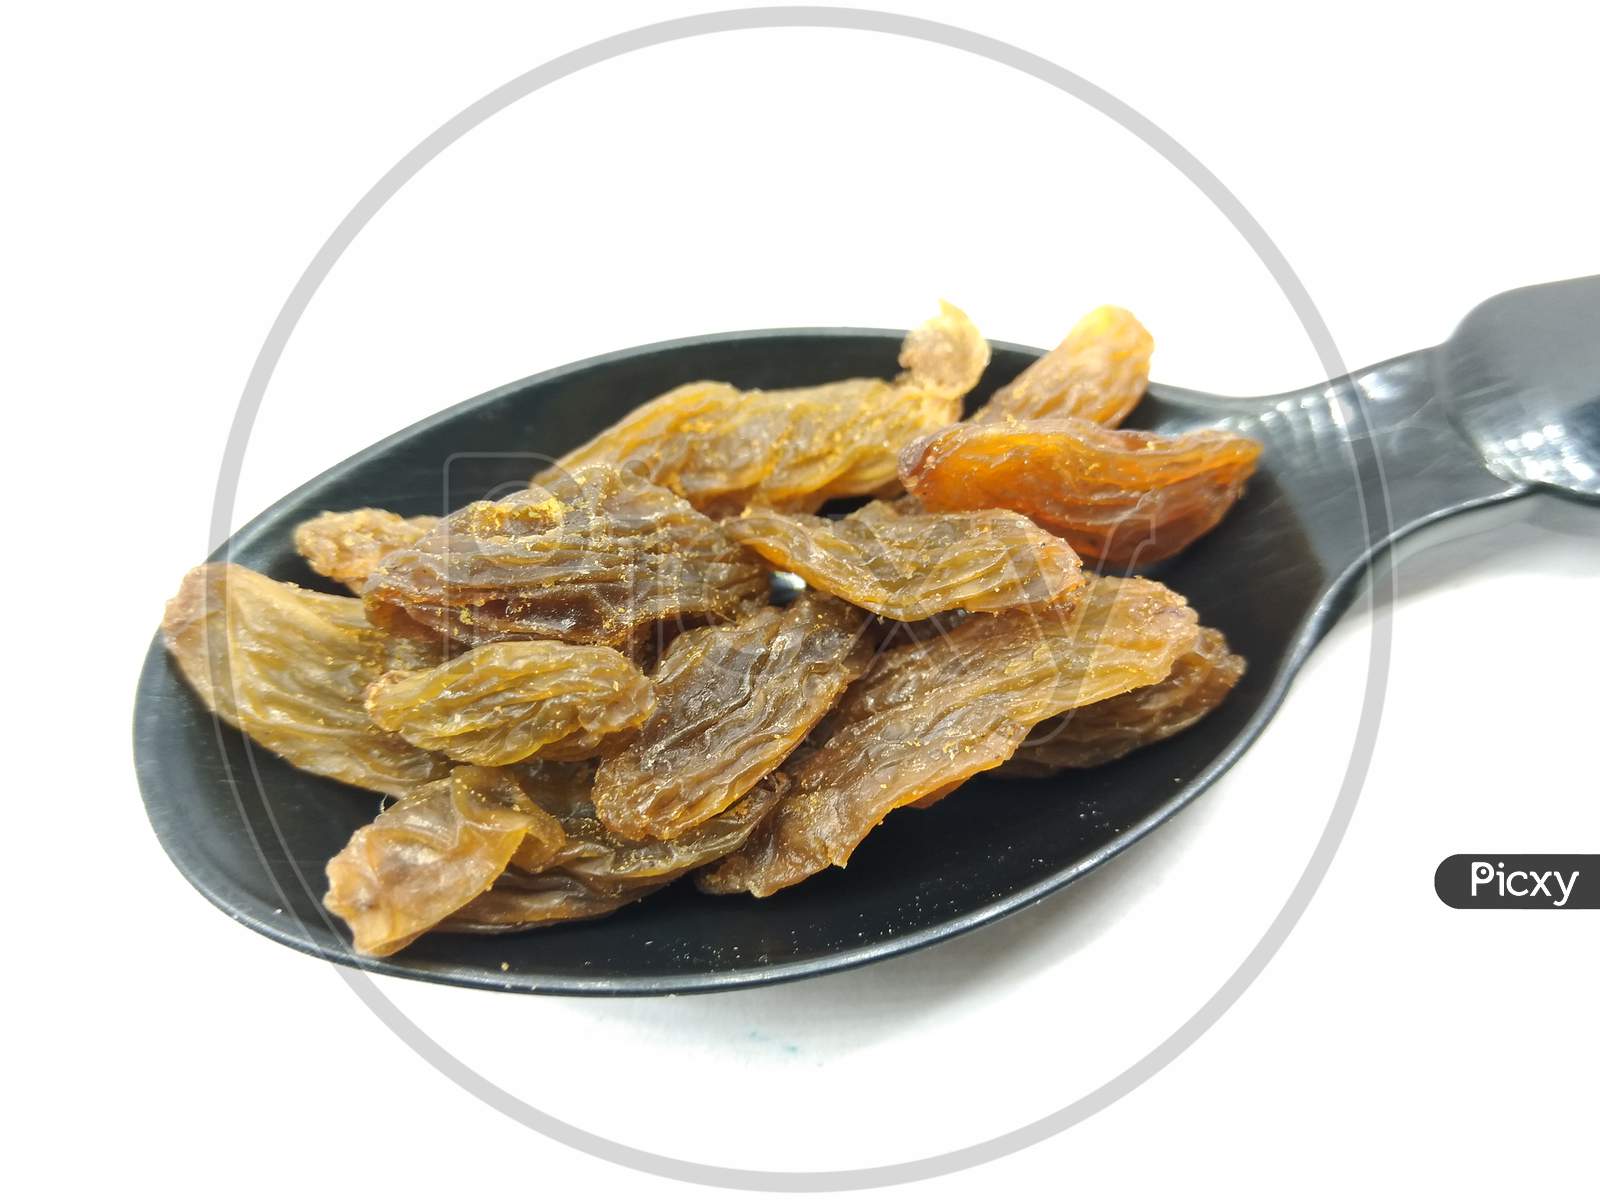 Dried Grapes Or Raisin On an White Background